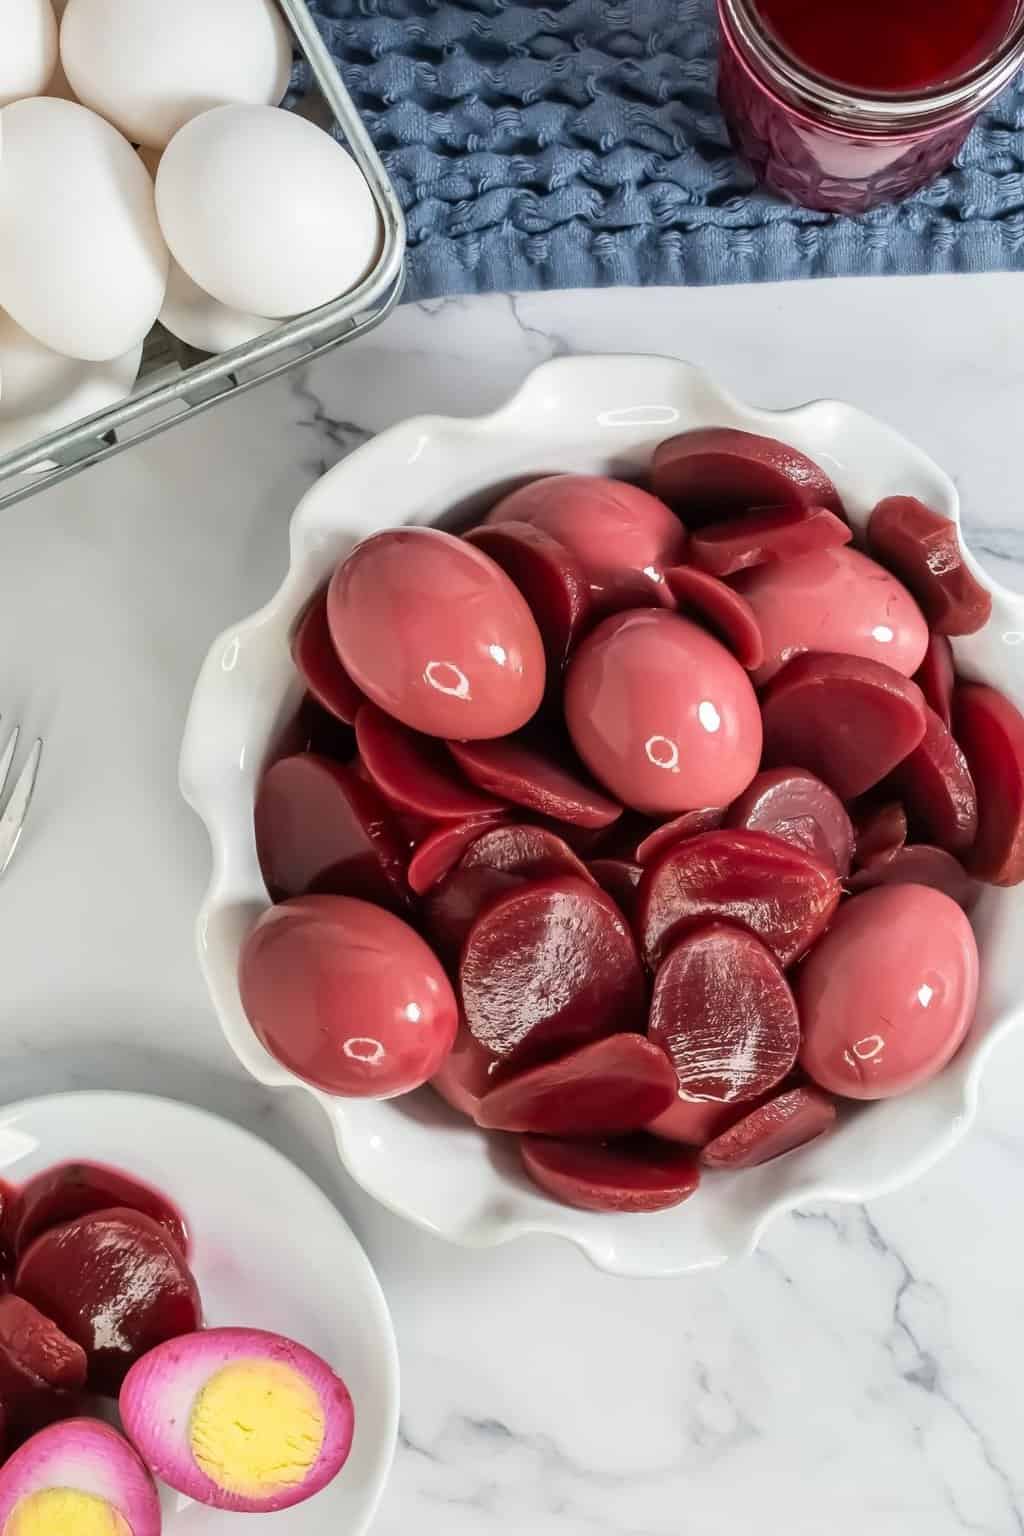 Red eggs served on a white plate.